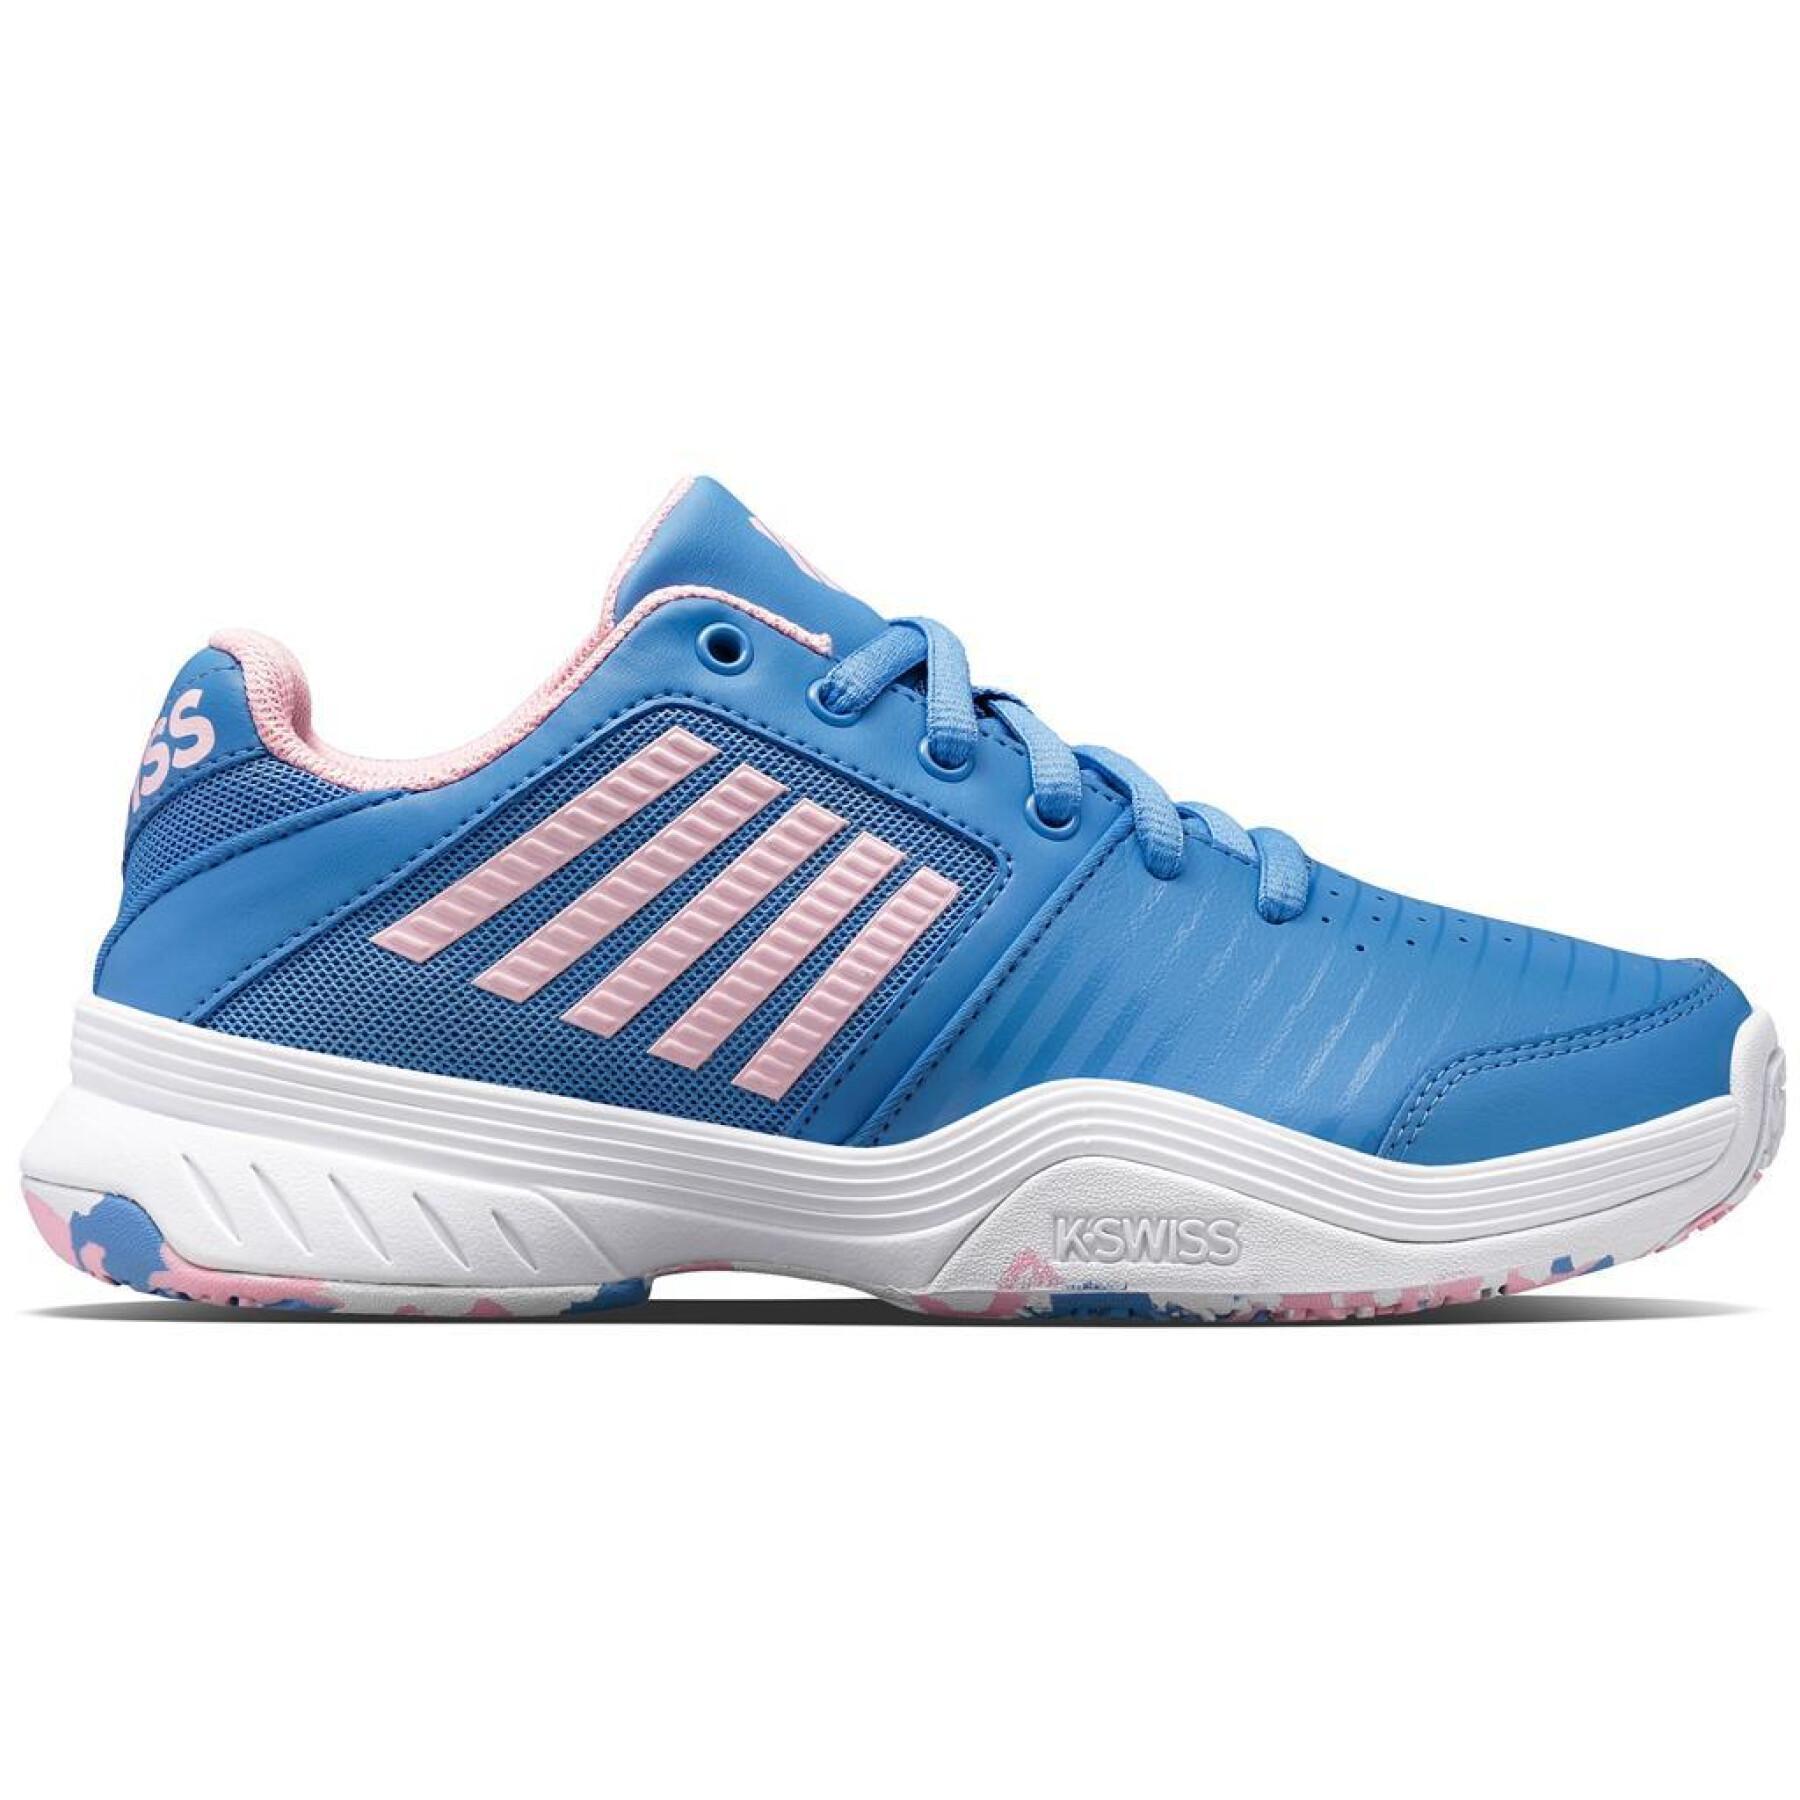 Fitness Toestand Periodiek Children's tennis shoes K-Swiss Court Express Omni - K-Swiss - Other brands  - Shoes